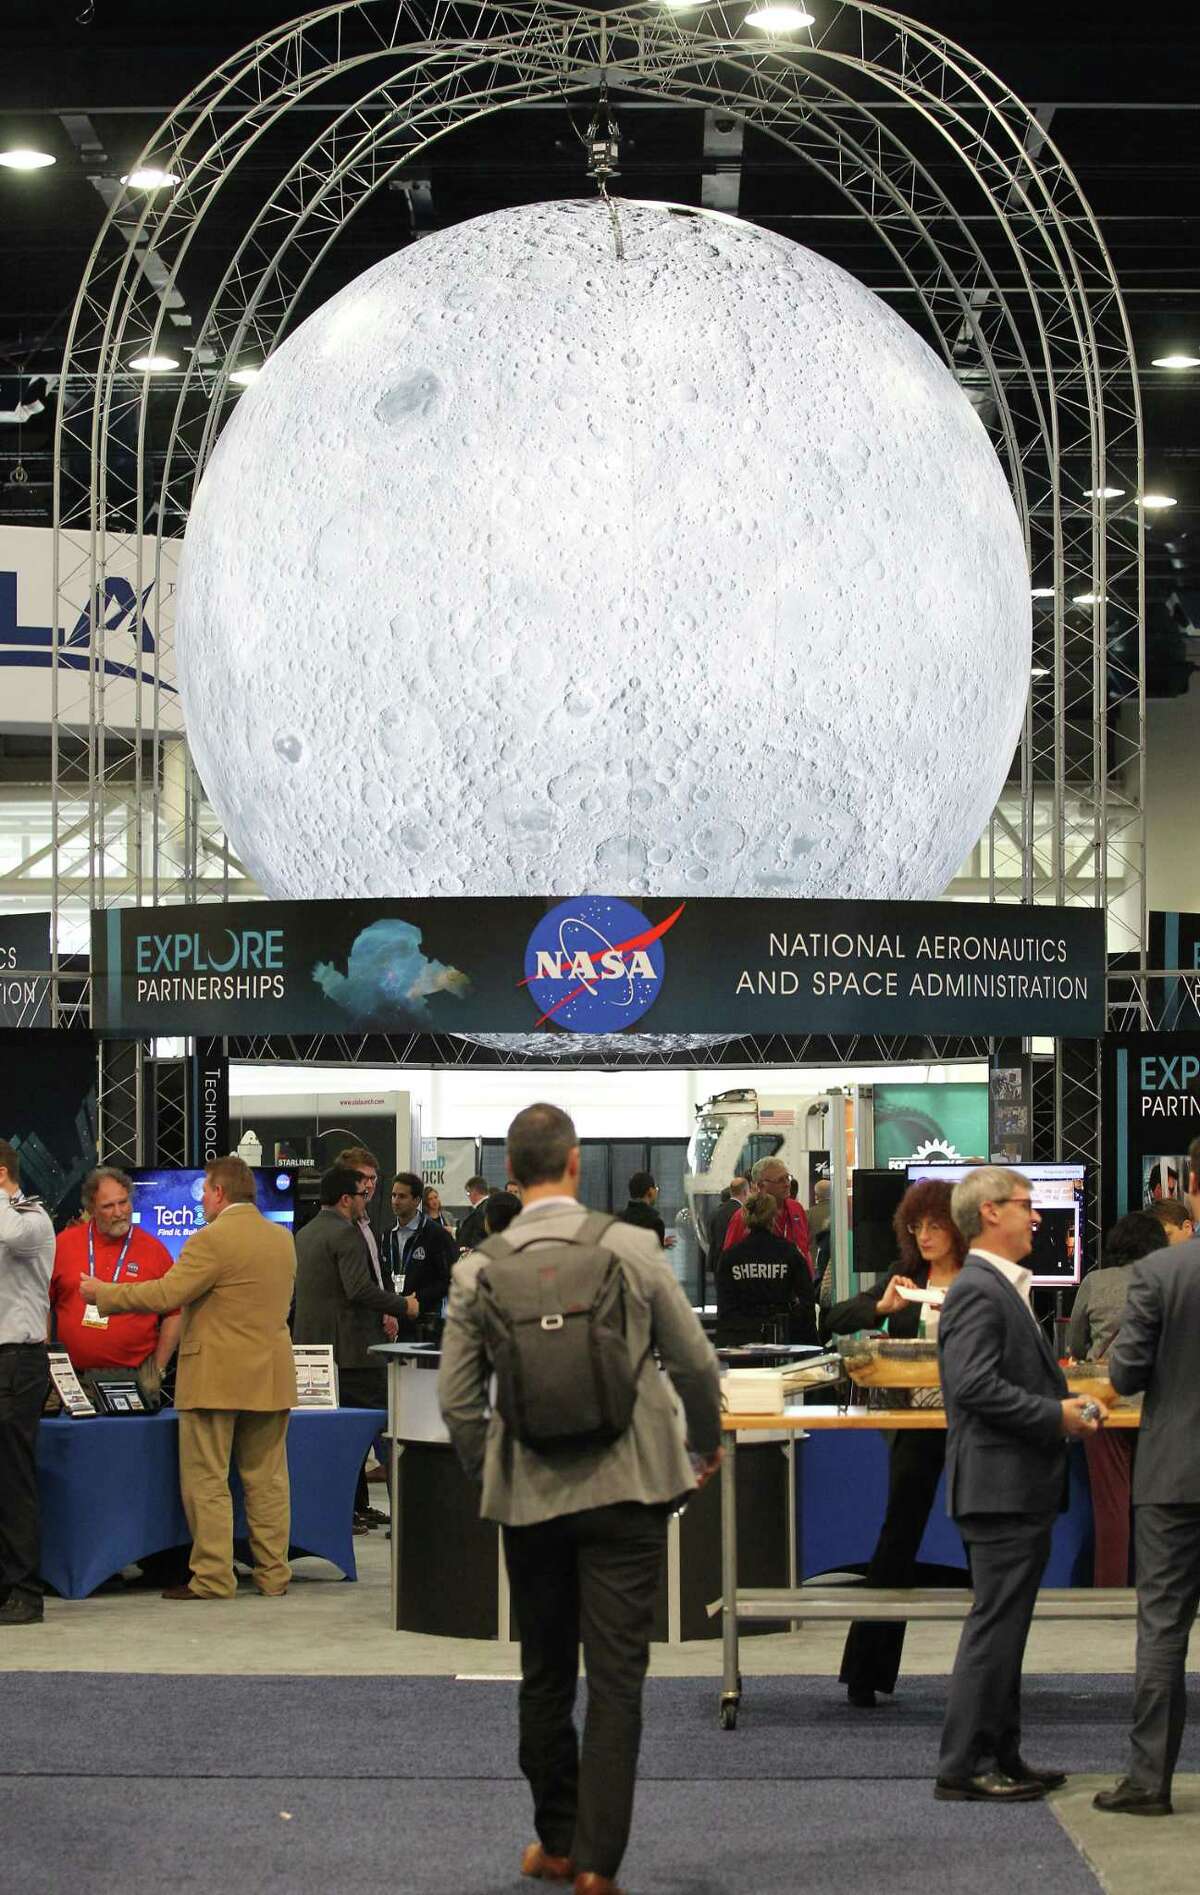 A large moon over NASA's display is on the show floor at the annual SpaceCom (Space Commerce Conference and Exposition) Tuesday, Nov. 27, 2018, in Houston.